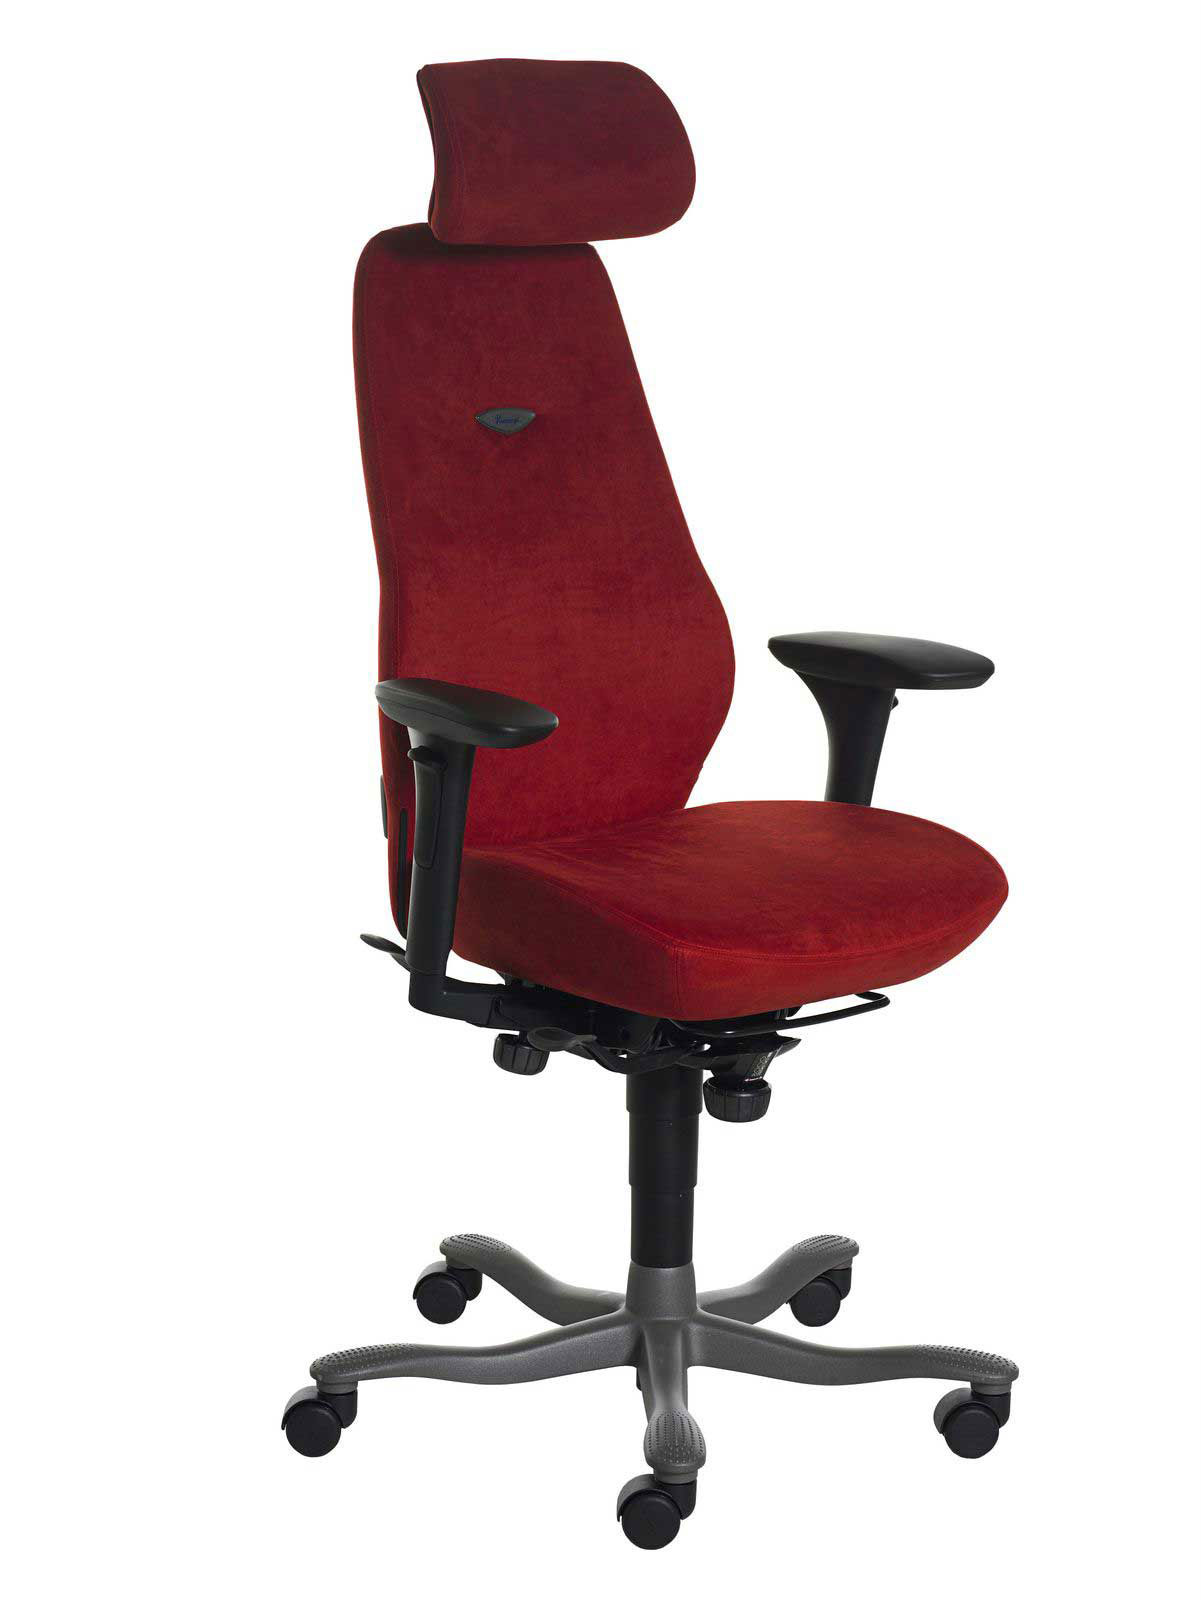 most expensive office chair